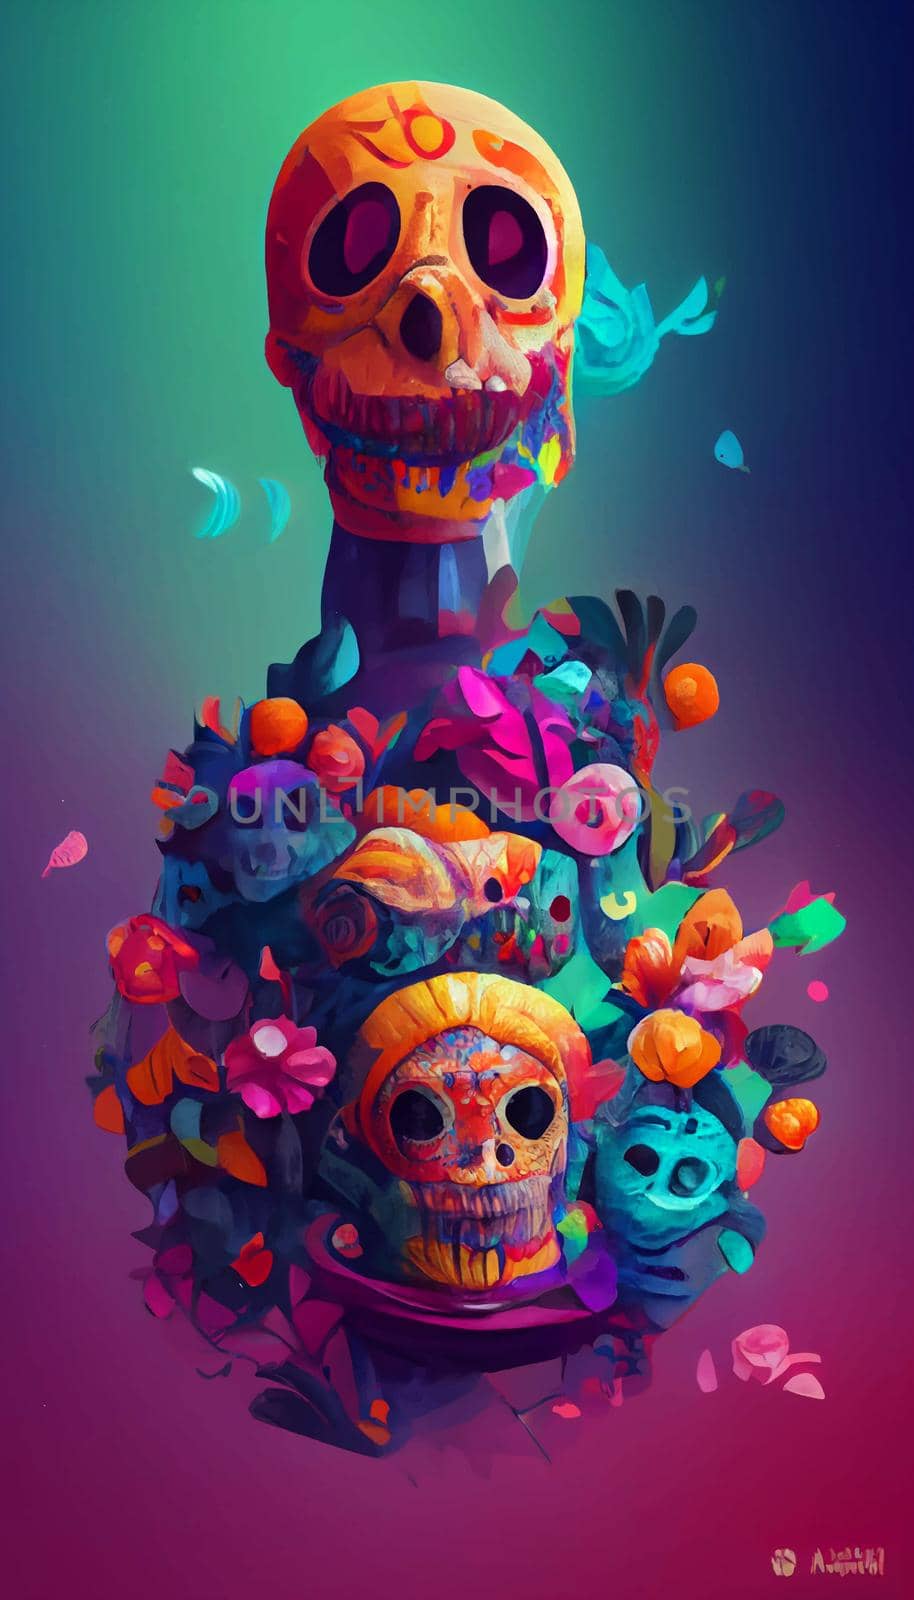 beautiful illustration of the Day of the Dead, Mexican tradition. colorful wallpaper of the day of the dead. catrin catrina.